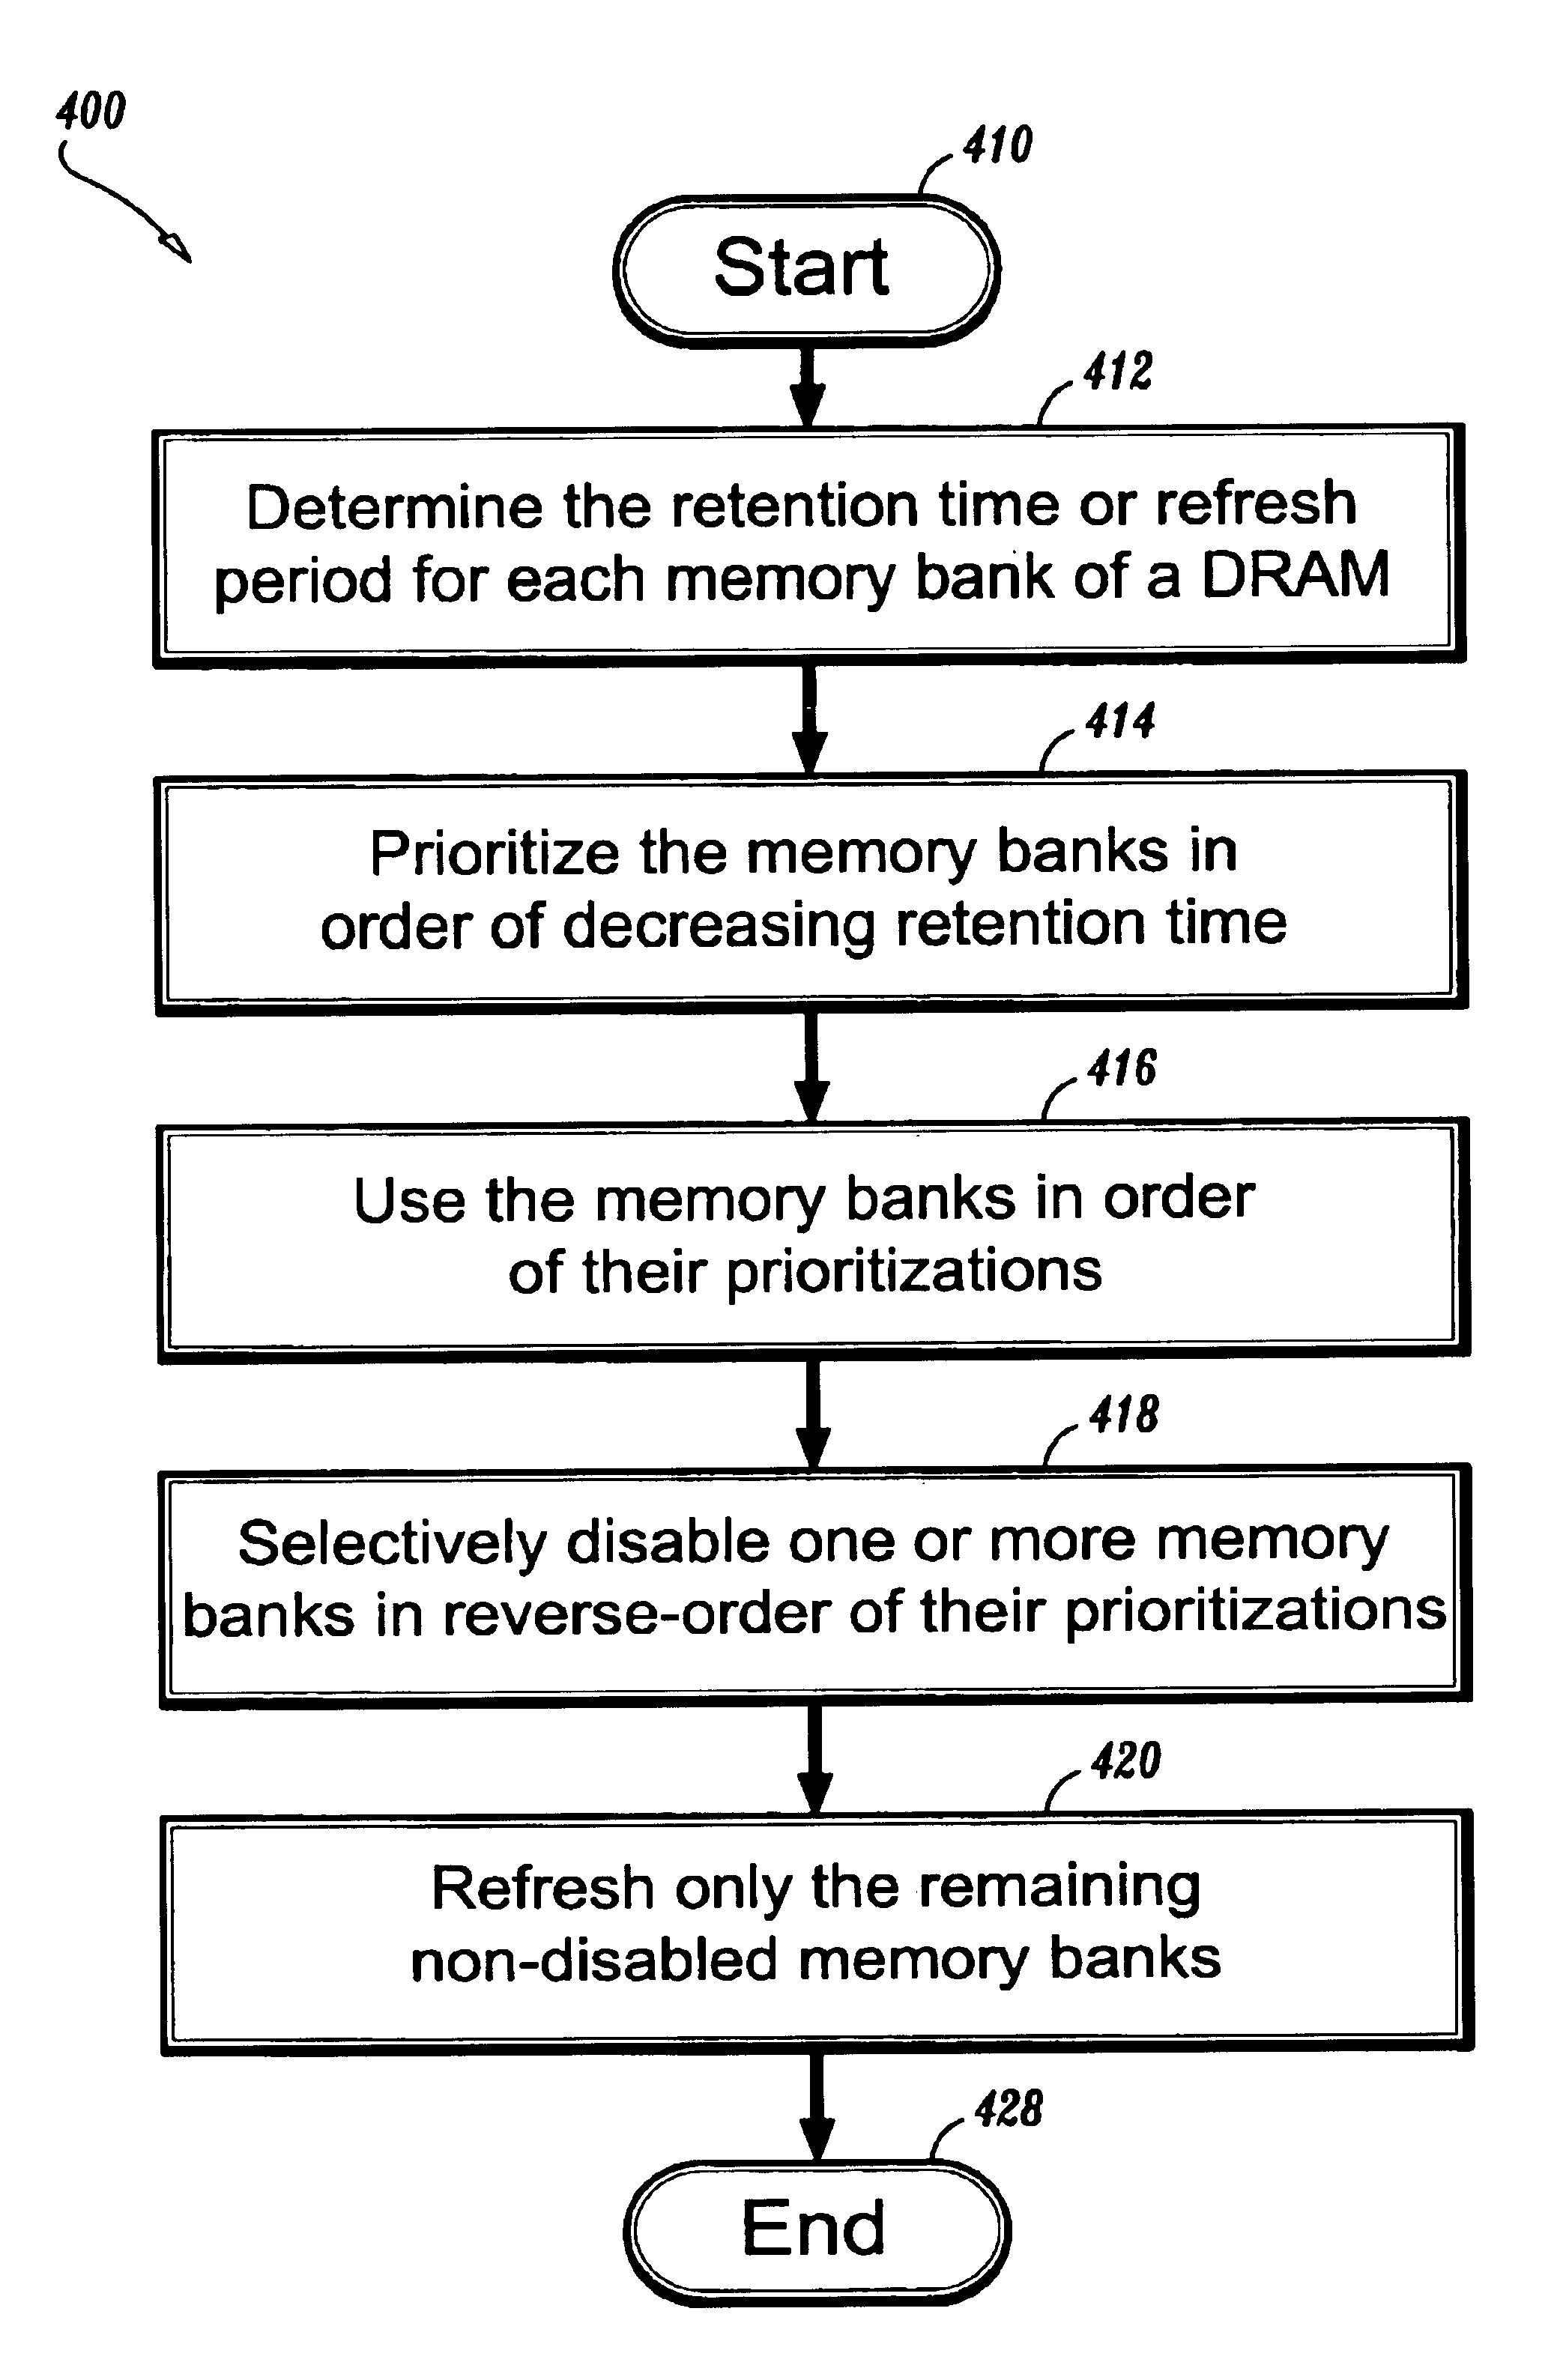 Bank address mapping according to bank retention time in dynamic random access memories